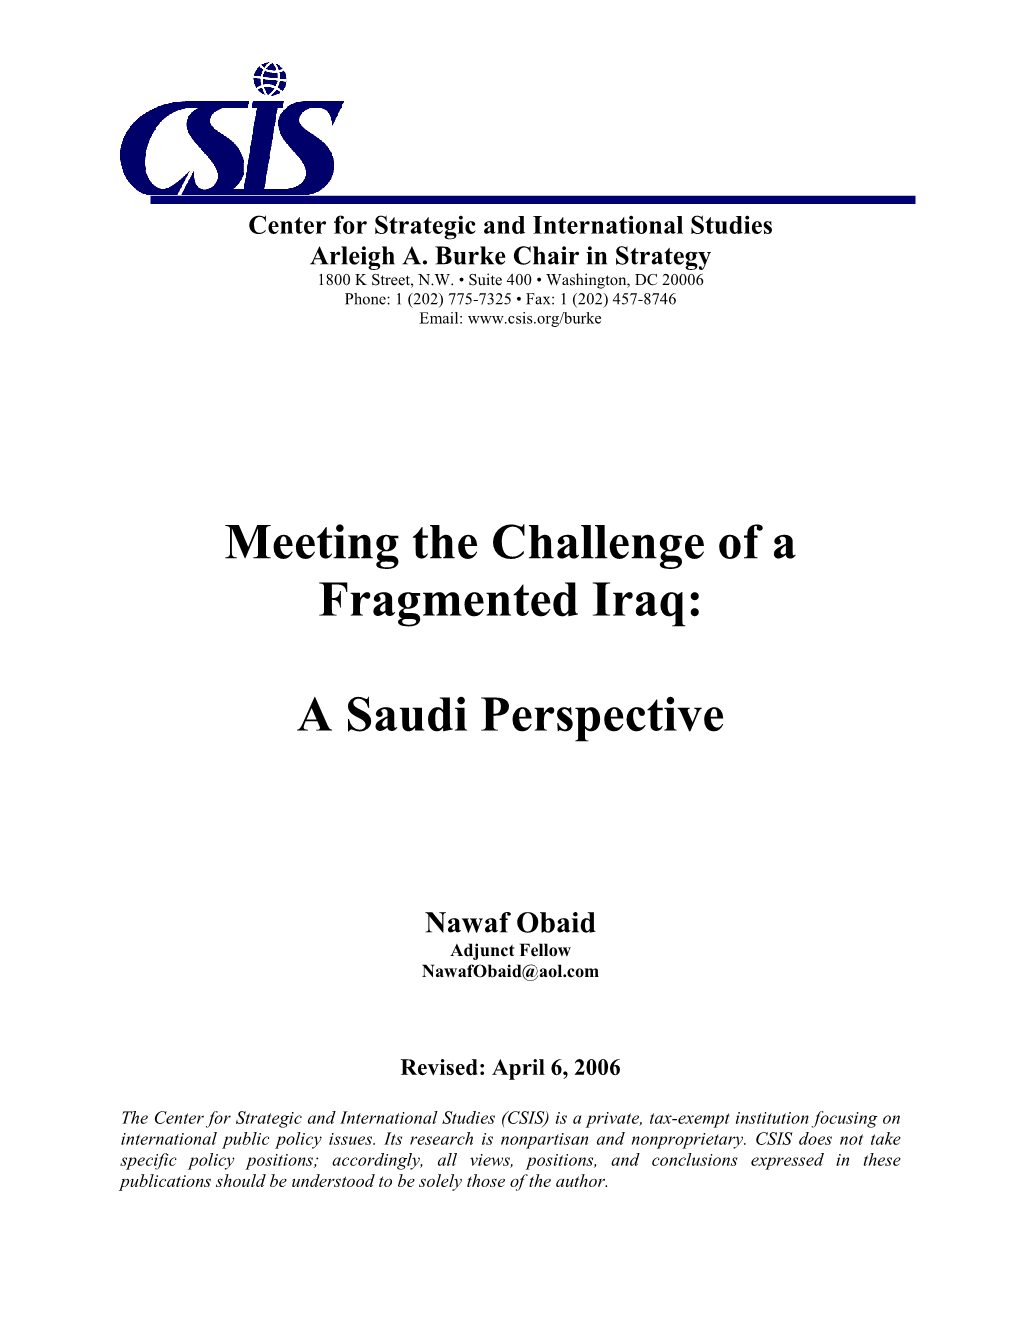 Meeting the Challenge of a Fragmented Iraq: a Saudi Perspective 4/6/06 Page Ii